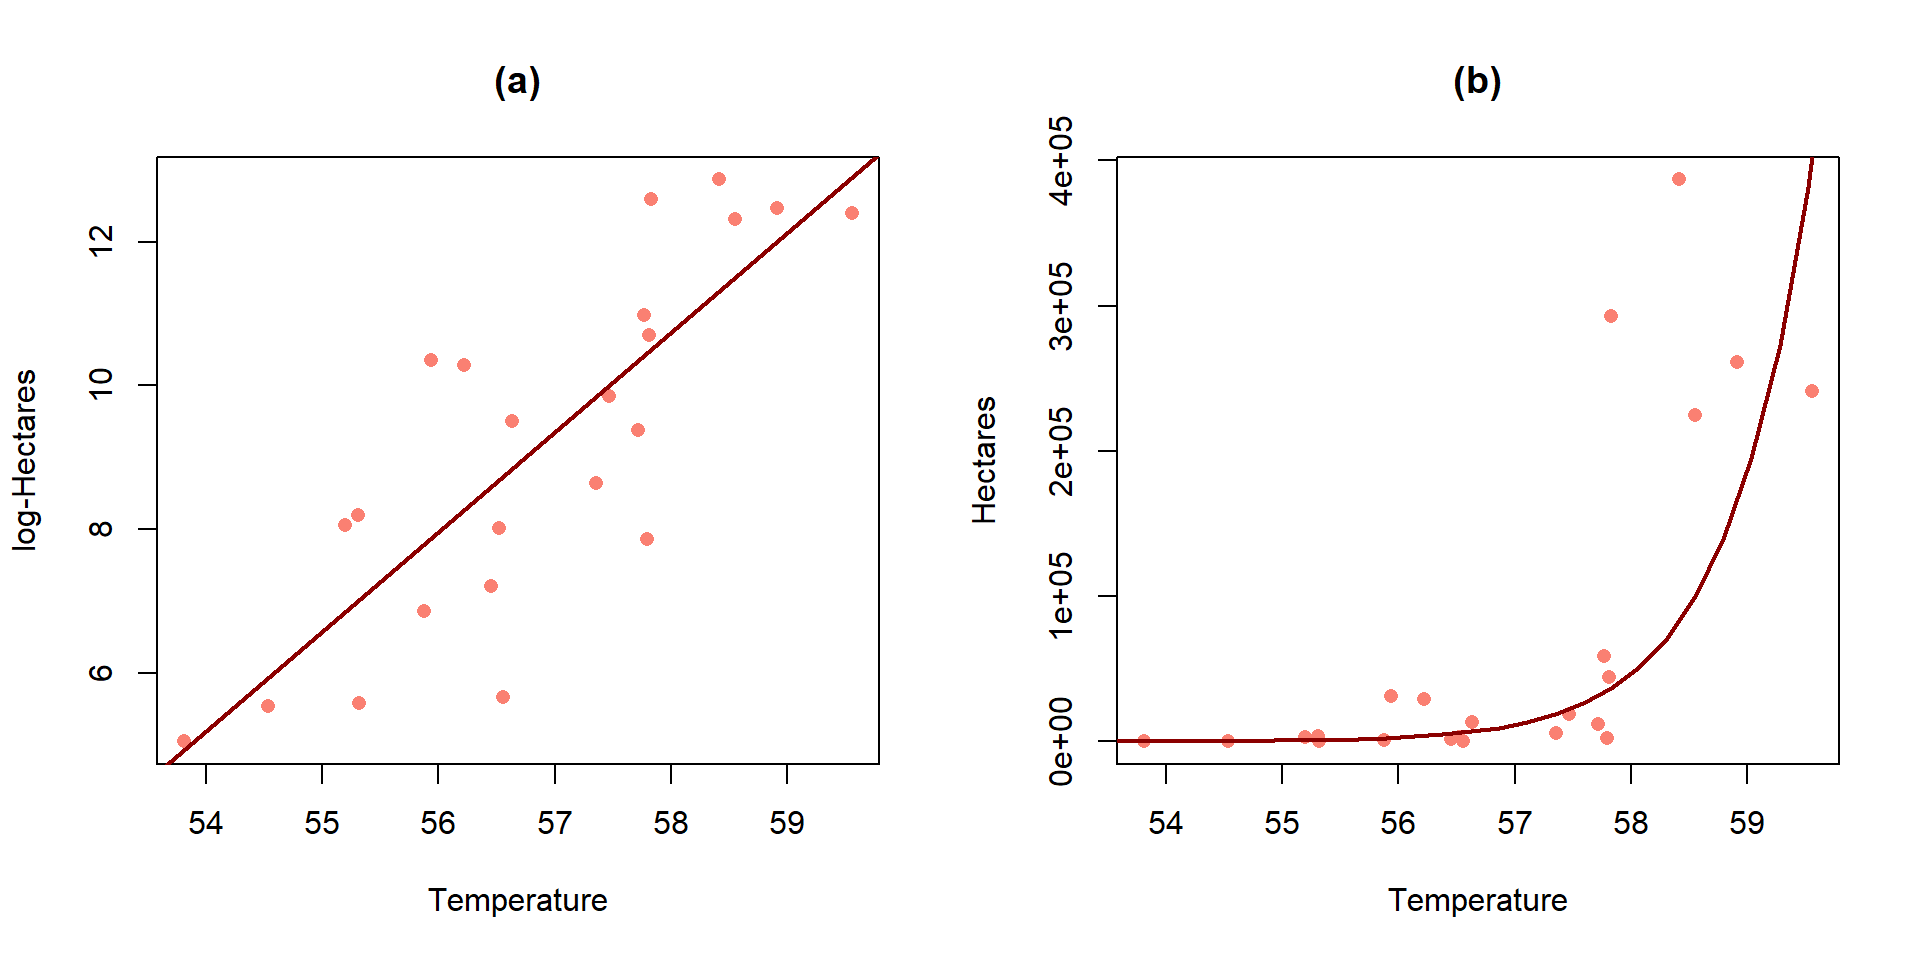 Plot of the estimated SLR (a) and implied model for the median on the original Hectares scale (b) for the area burned vs temperature data.